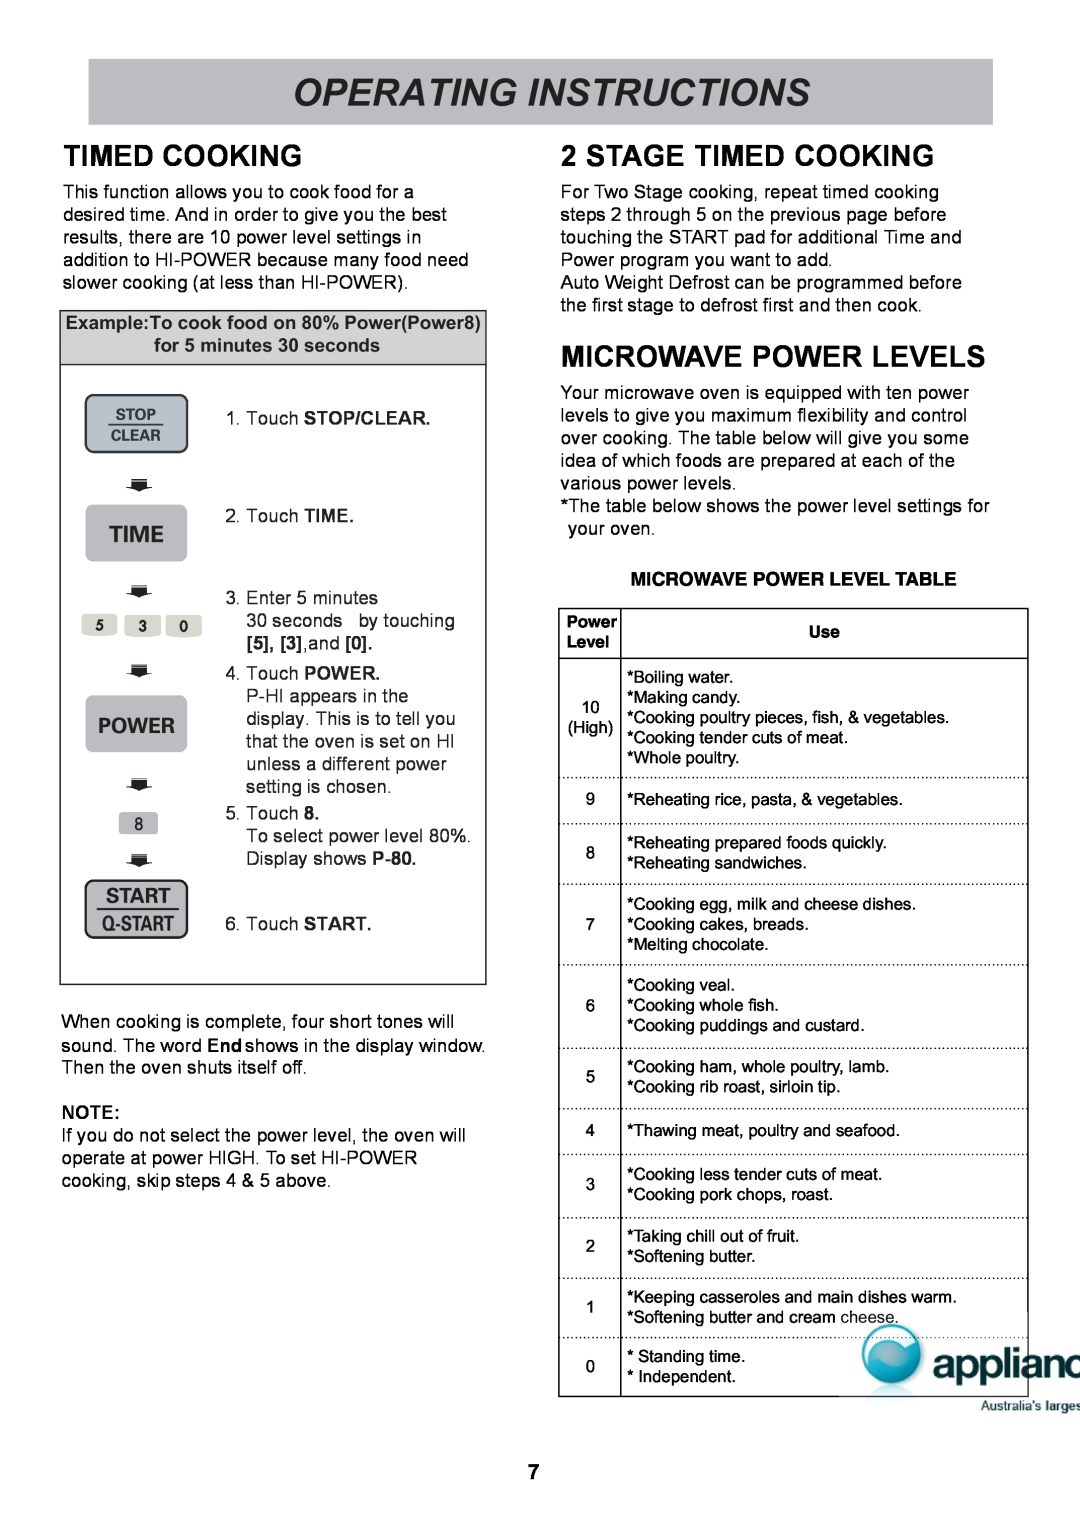 LG Electronics MS1949G owner manual Operating Instructions, Stage Timed Cooking, Microwave Power Levels 